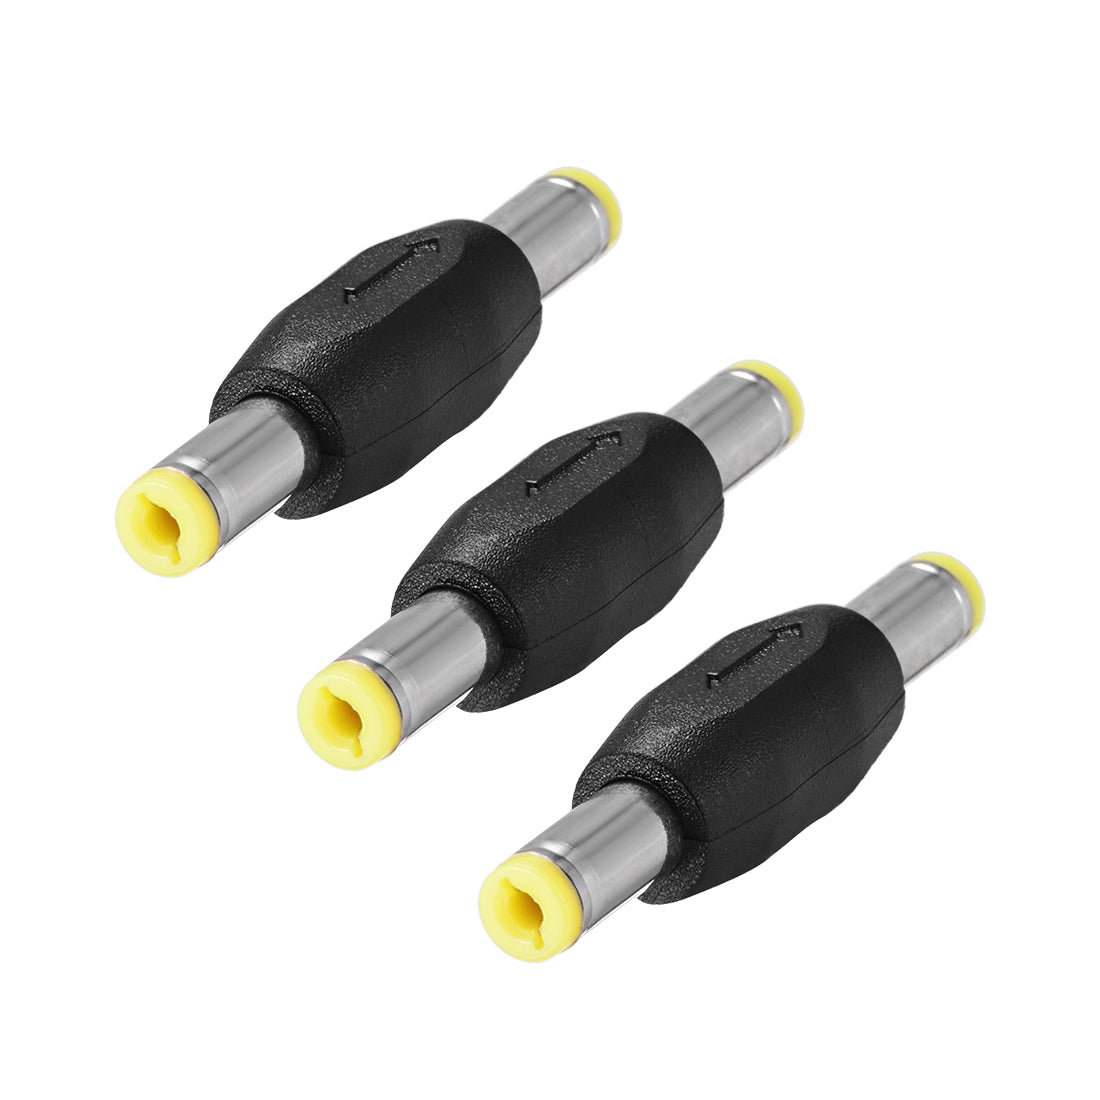 uxcell Uxcell DC Male to Male Coupler Connector 5.5mm x 2.1mm Power Cable Jack Adapter 3Pcs